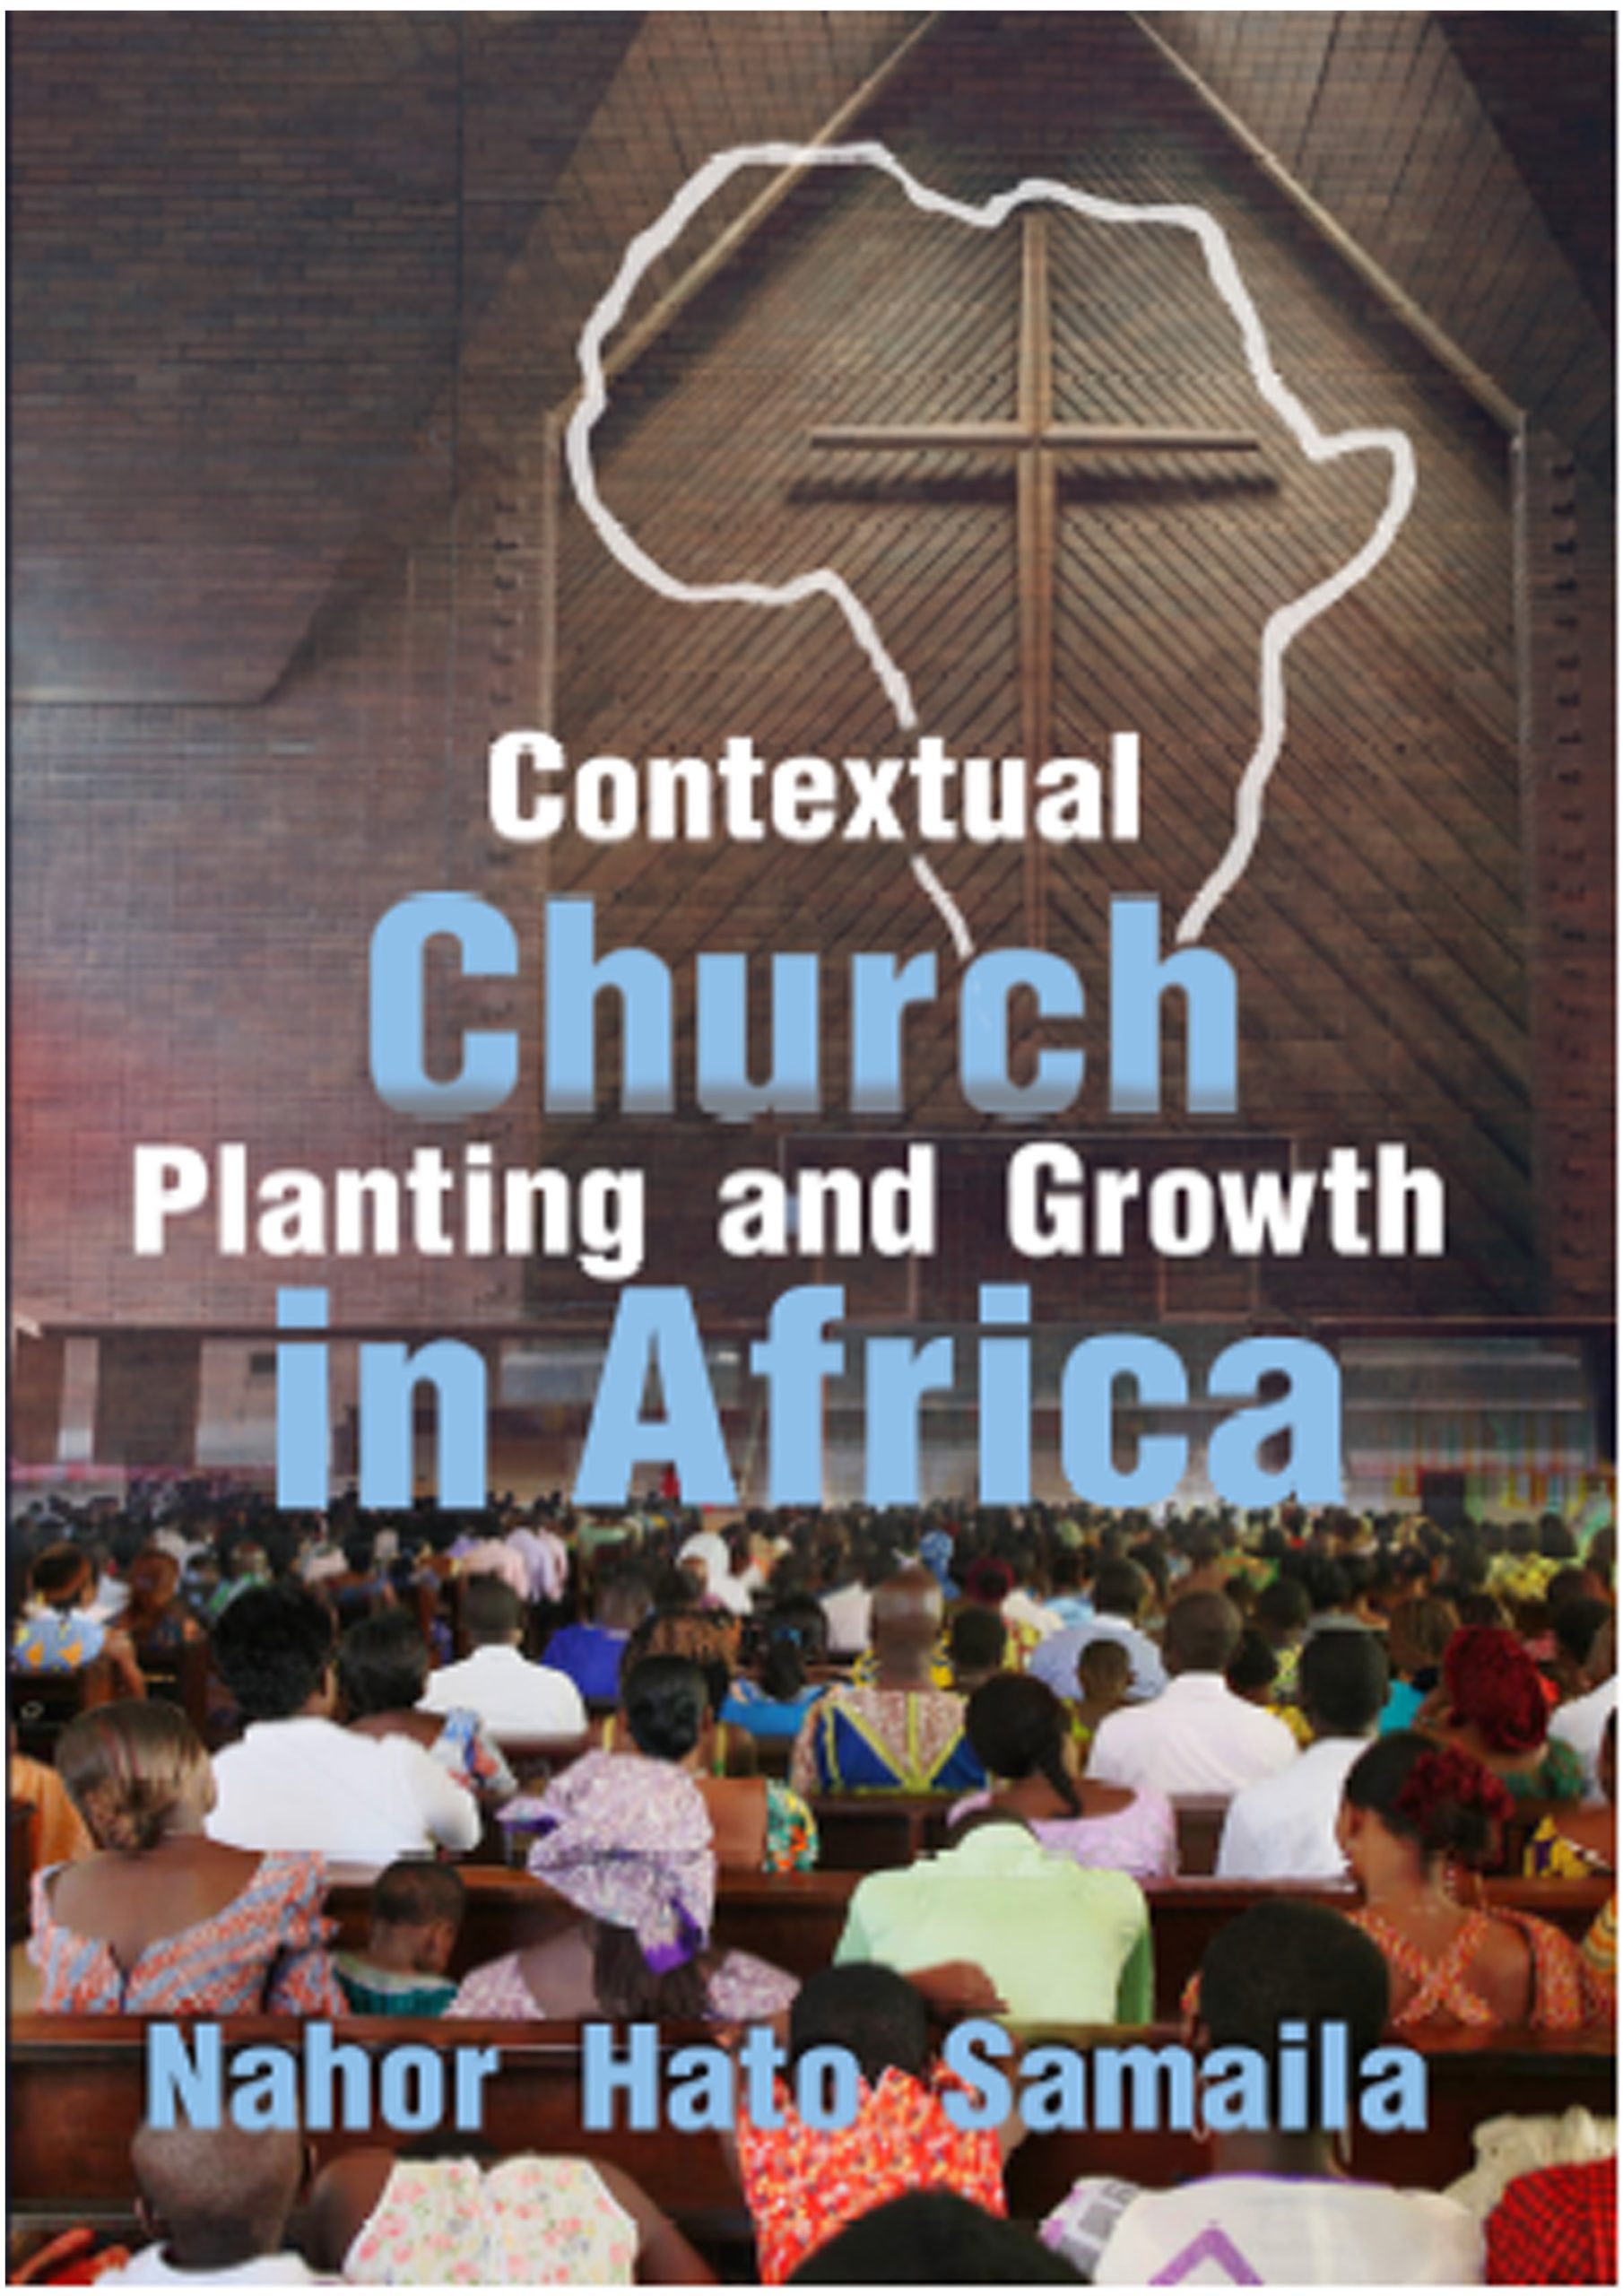 Contextual Church Planting and Growth in Africa 